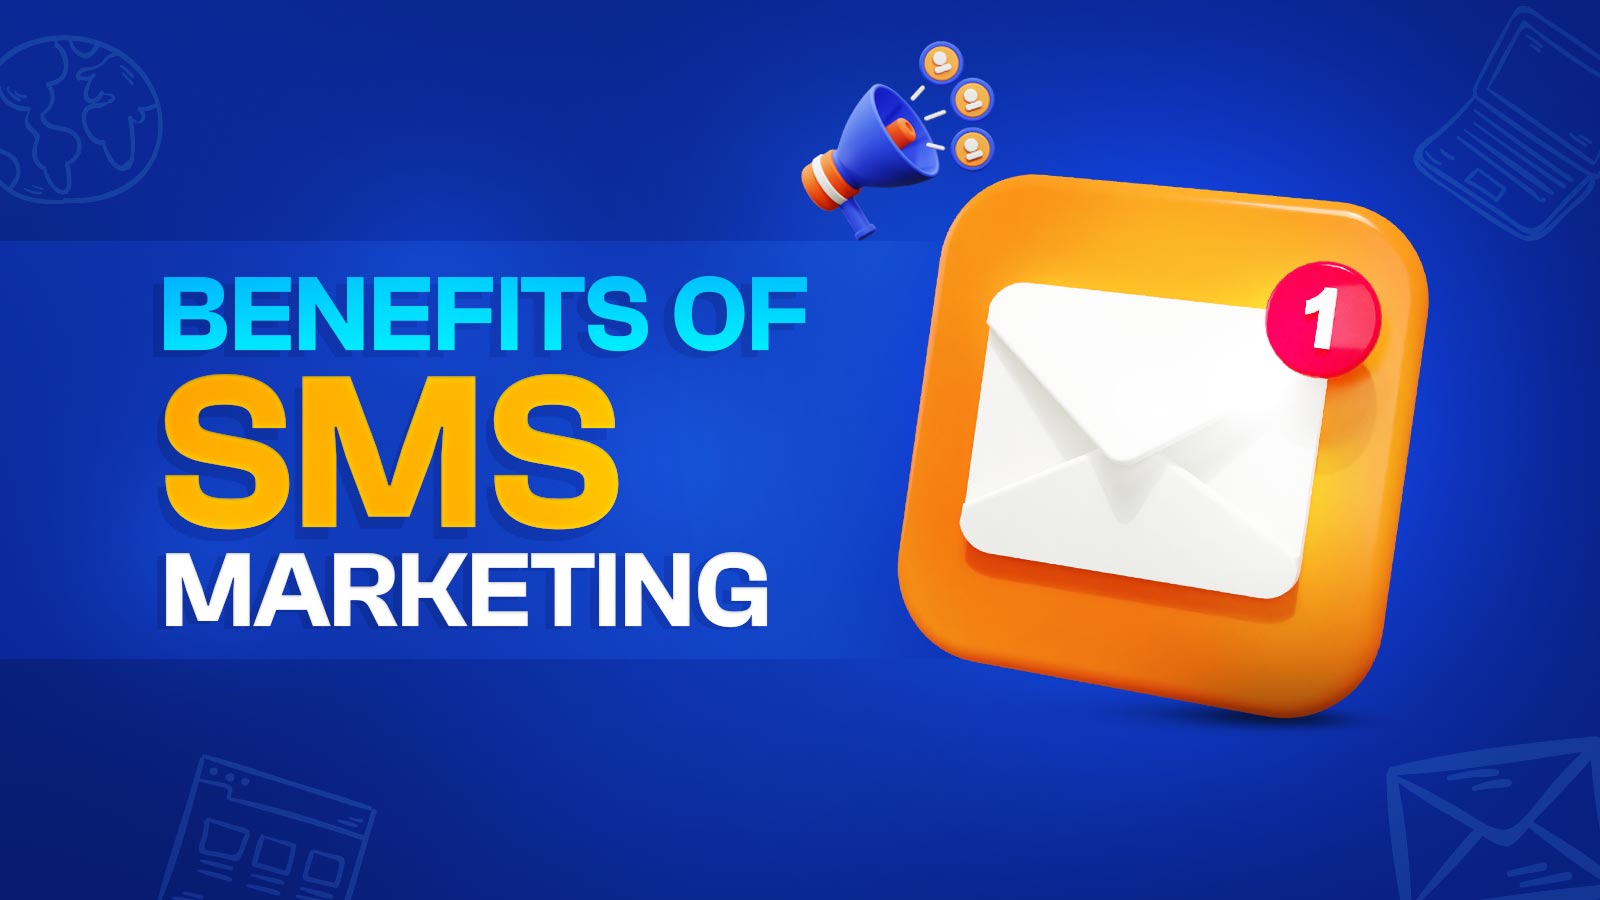 9 Key Benefits Of SMS Marketing You Need To Know